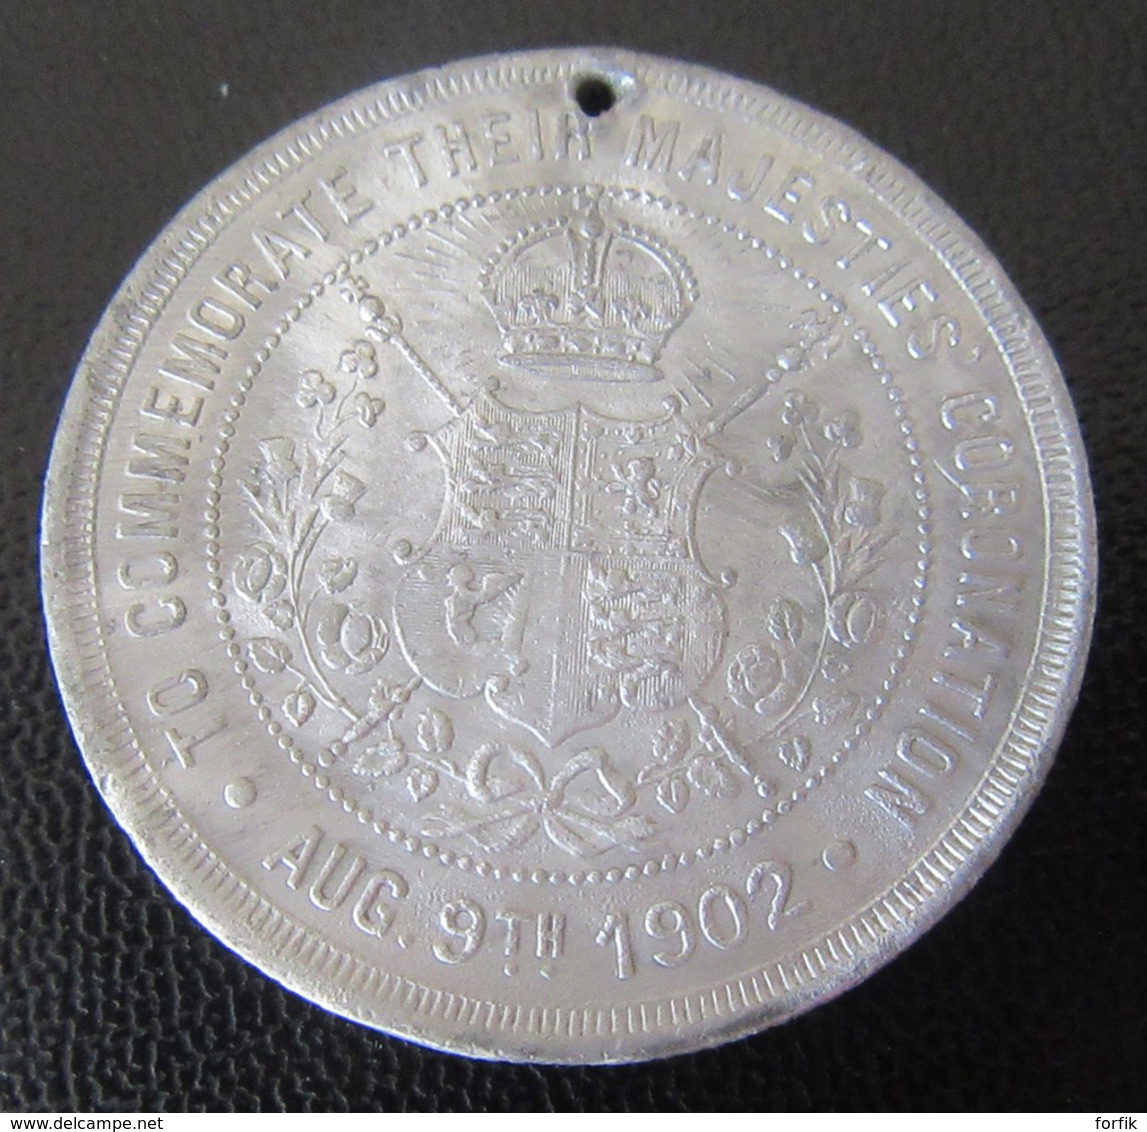 Médaille / Medal 1902 - King Edward VII / Queen Alexandra - Commemoration  Of Their Majesties' Coronation - Royaux/De Noblesse